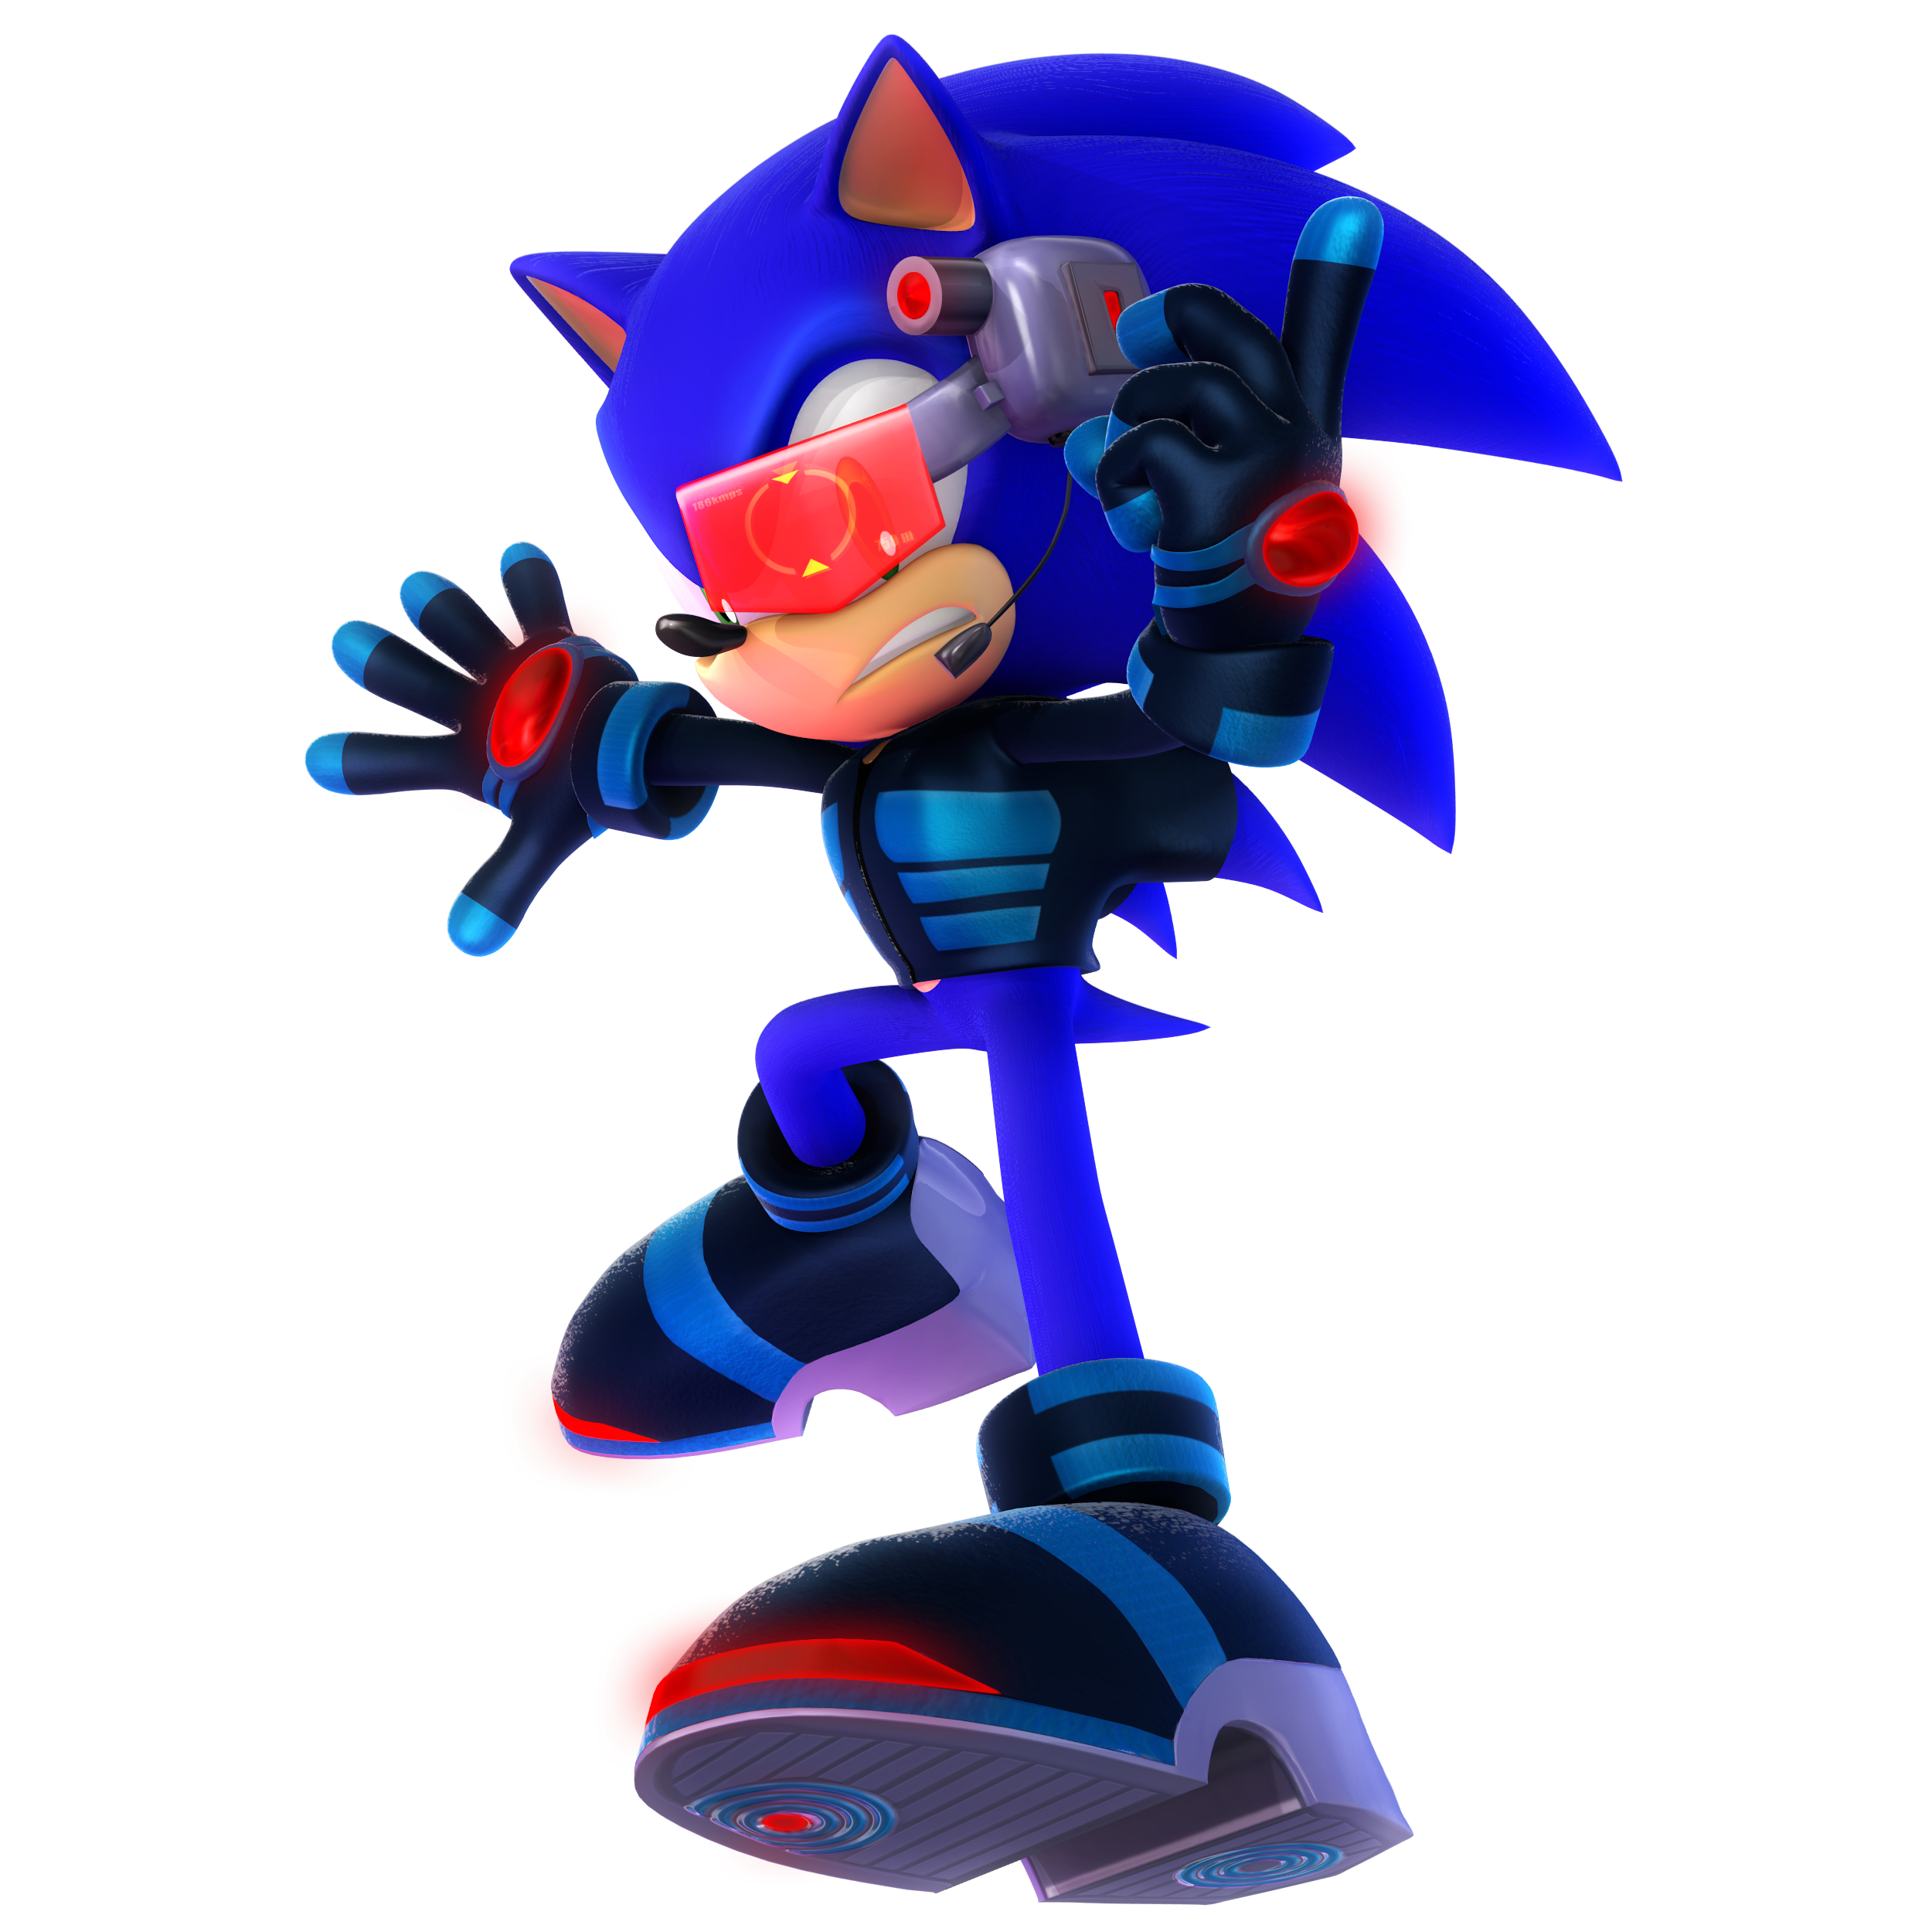 Sonic Chao Render by Nibroc-Rock on DeviantArt